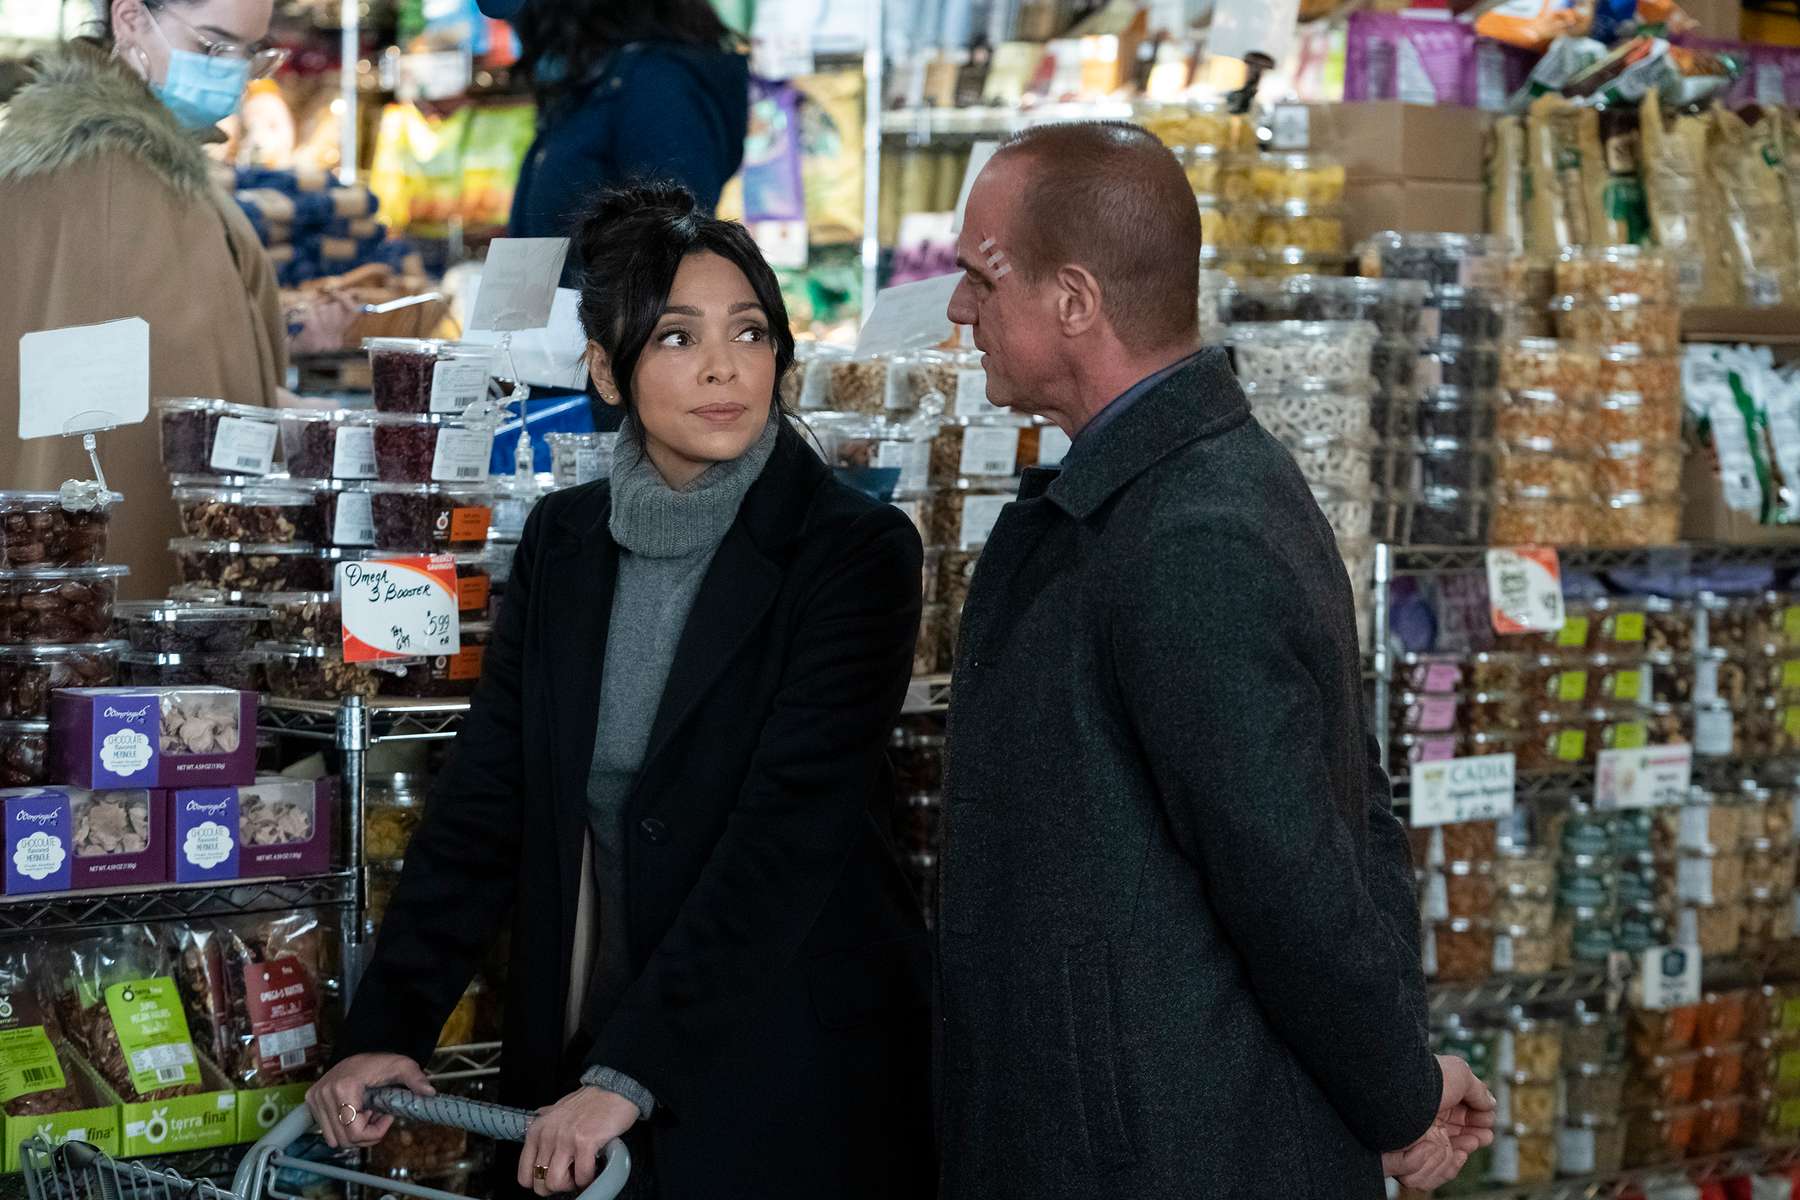 LAW & ORDER: ORGANIZED CRIME -- {quote}Say Hello To My Little Friend{quote} Episode 103 -- Pictured: (l-r) Tamara Taylor as Angela Wheatley, Christopher Meloni as Detective Elliot Stabler -- (Photo by: Heidi Gutman/NBC)